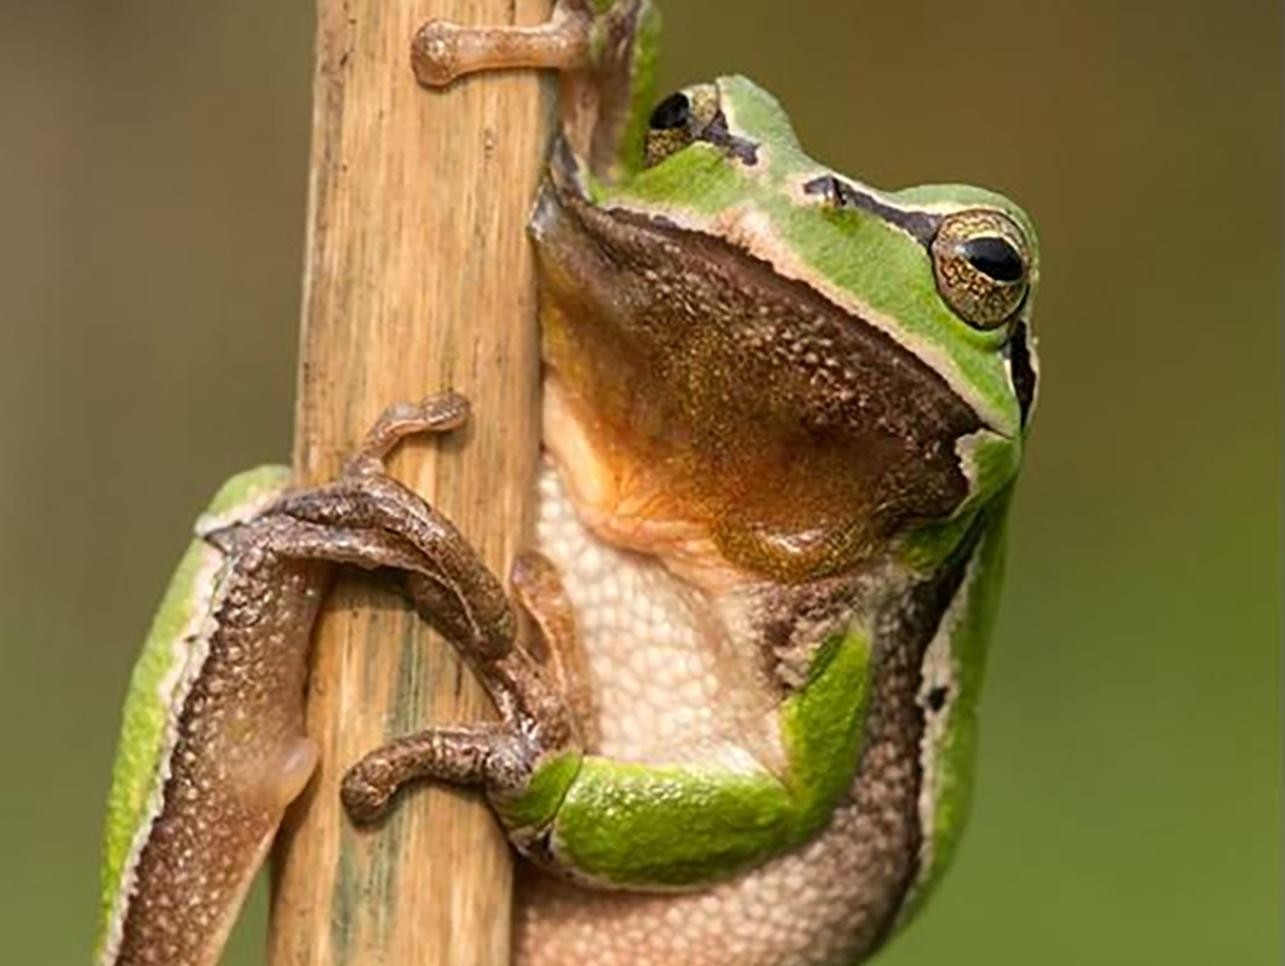 A tree frog on the stalk